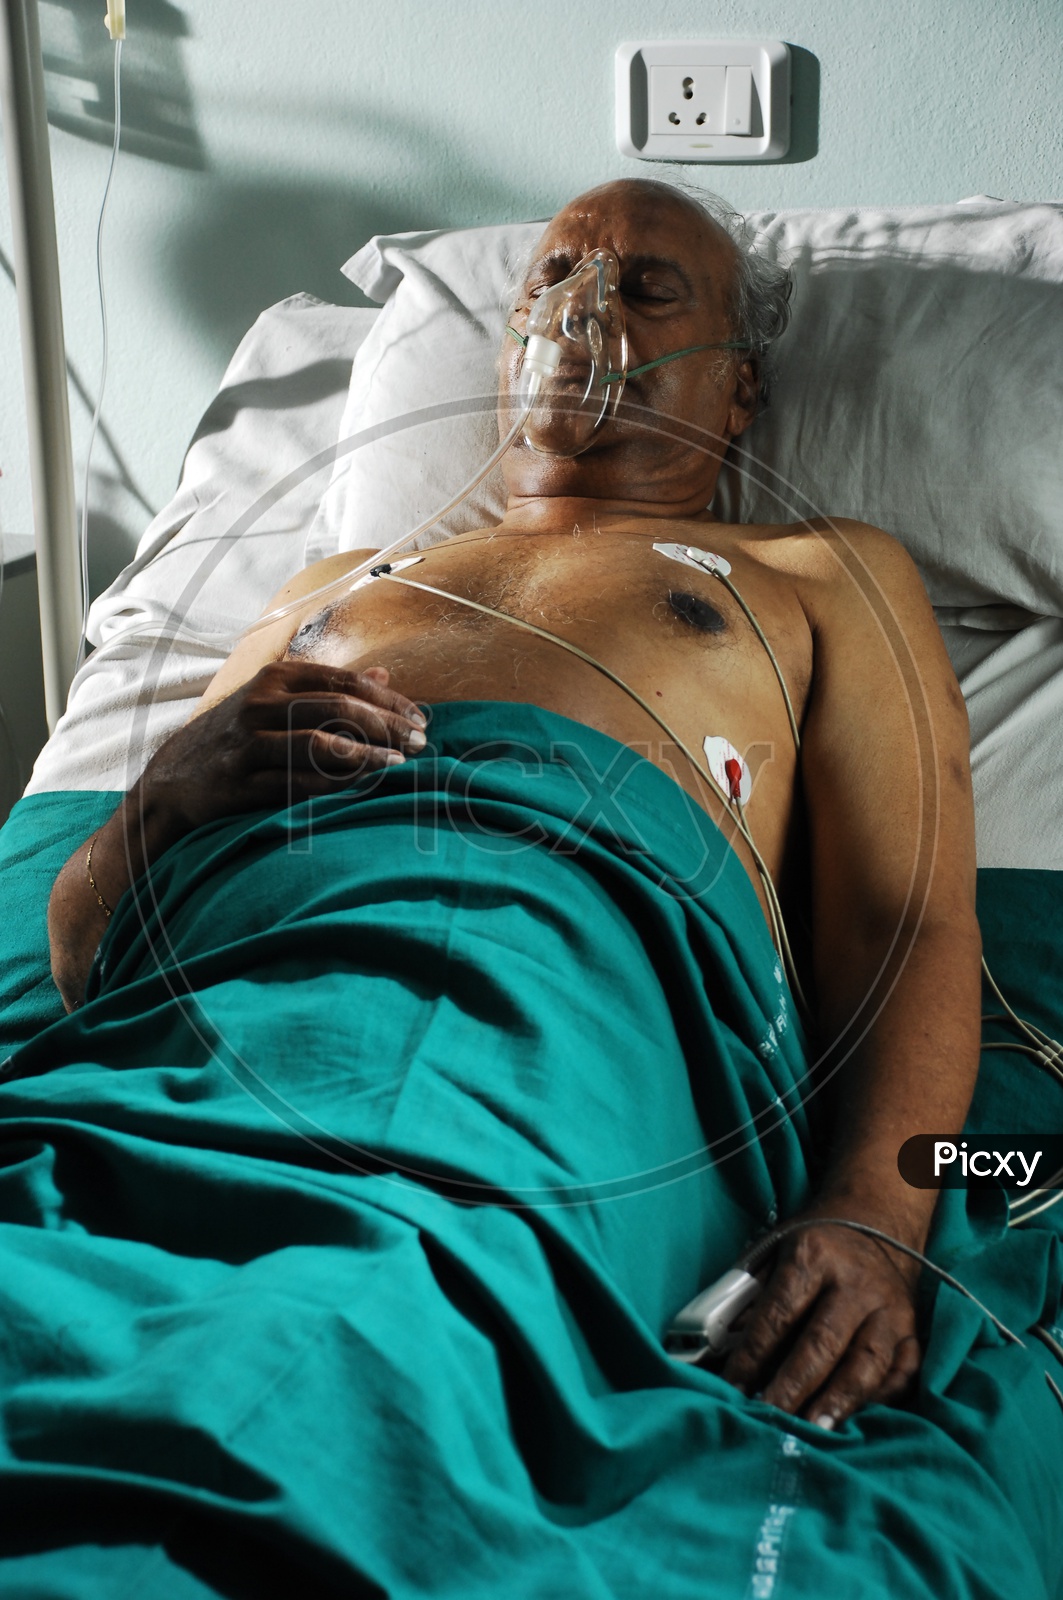 An old man in a hospital bed with oxygen mask